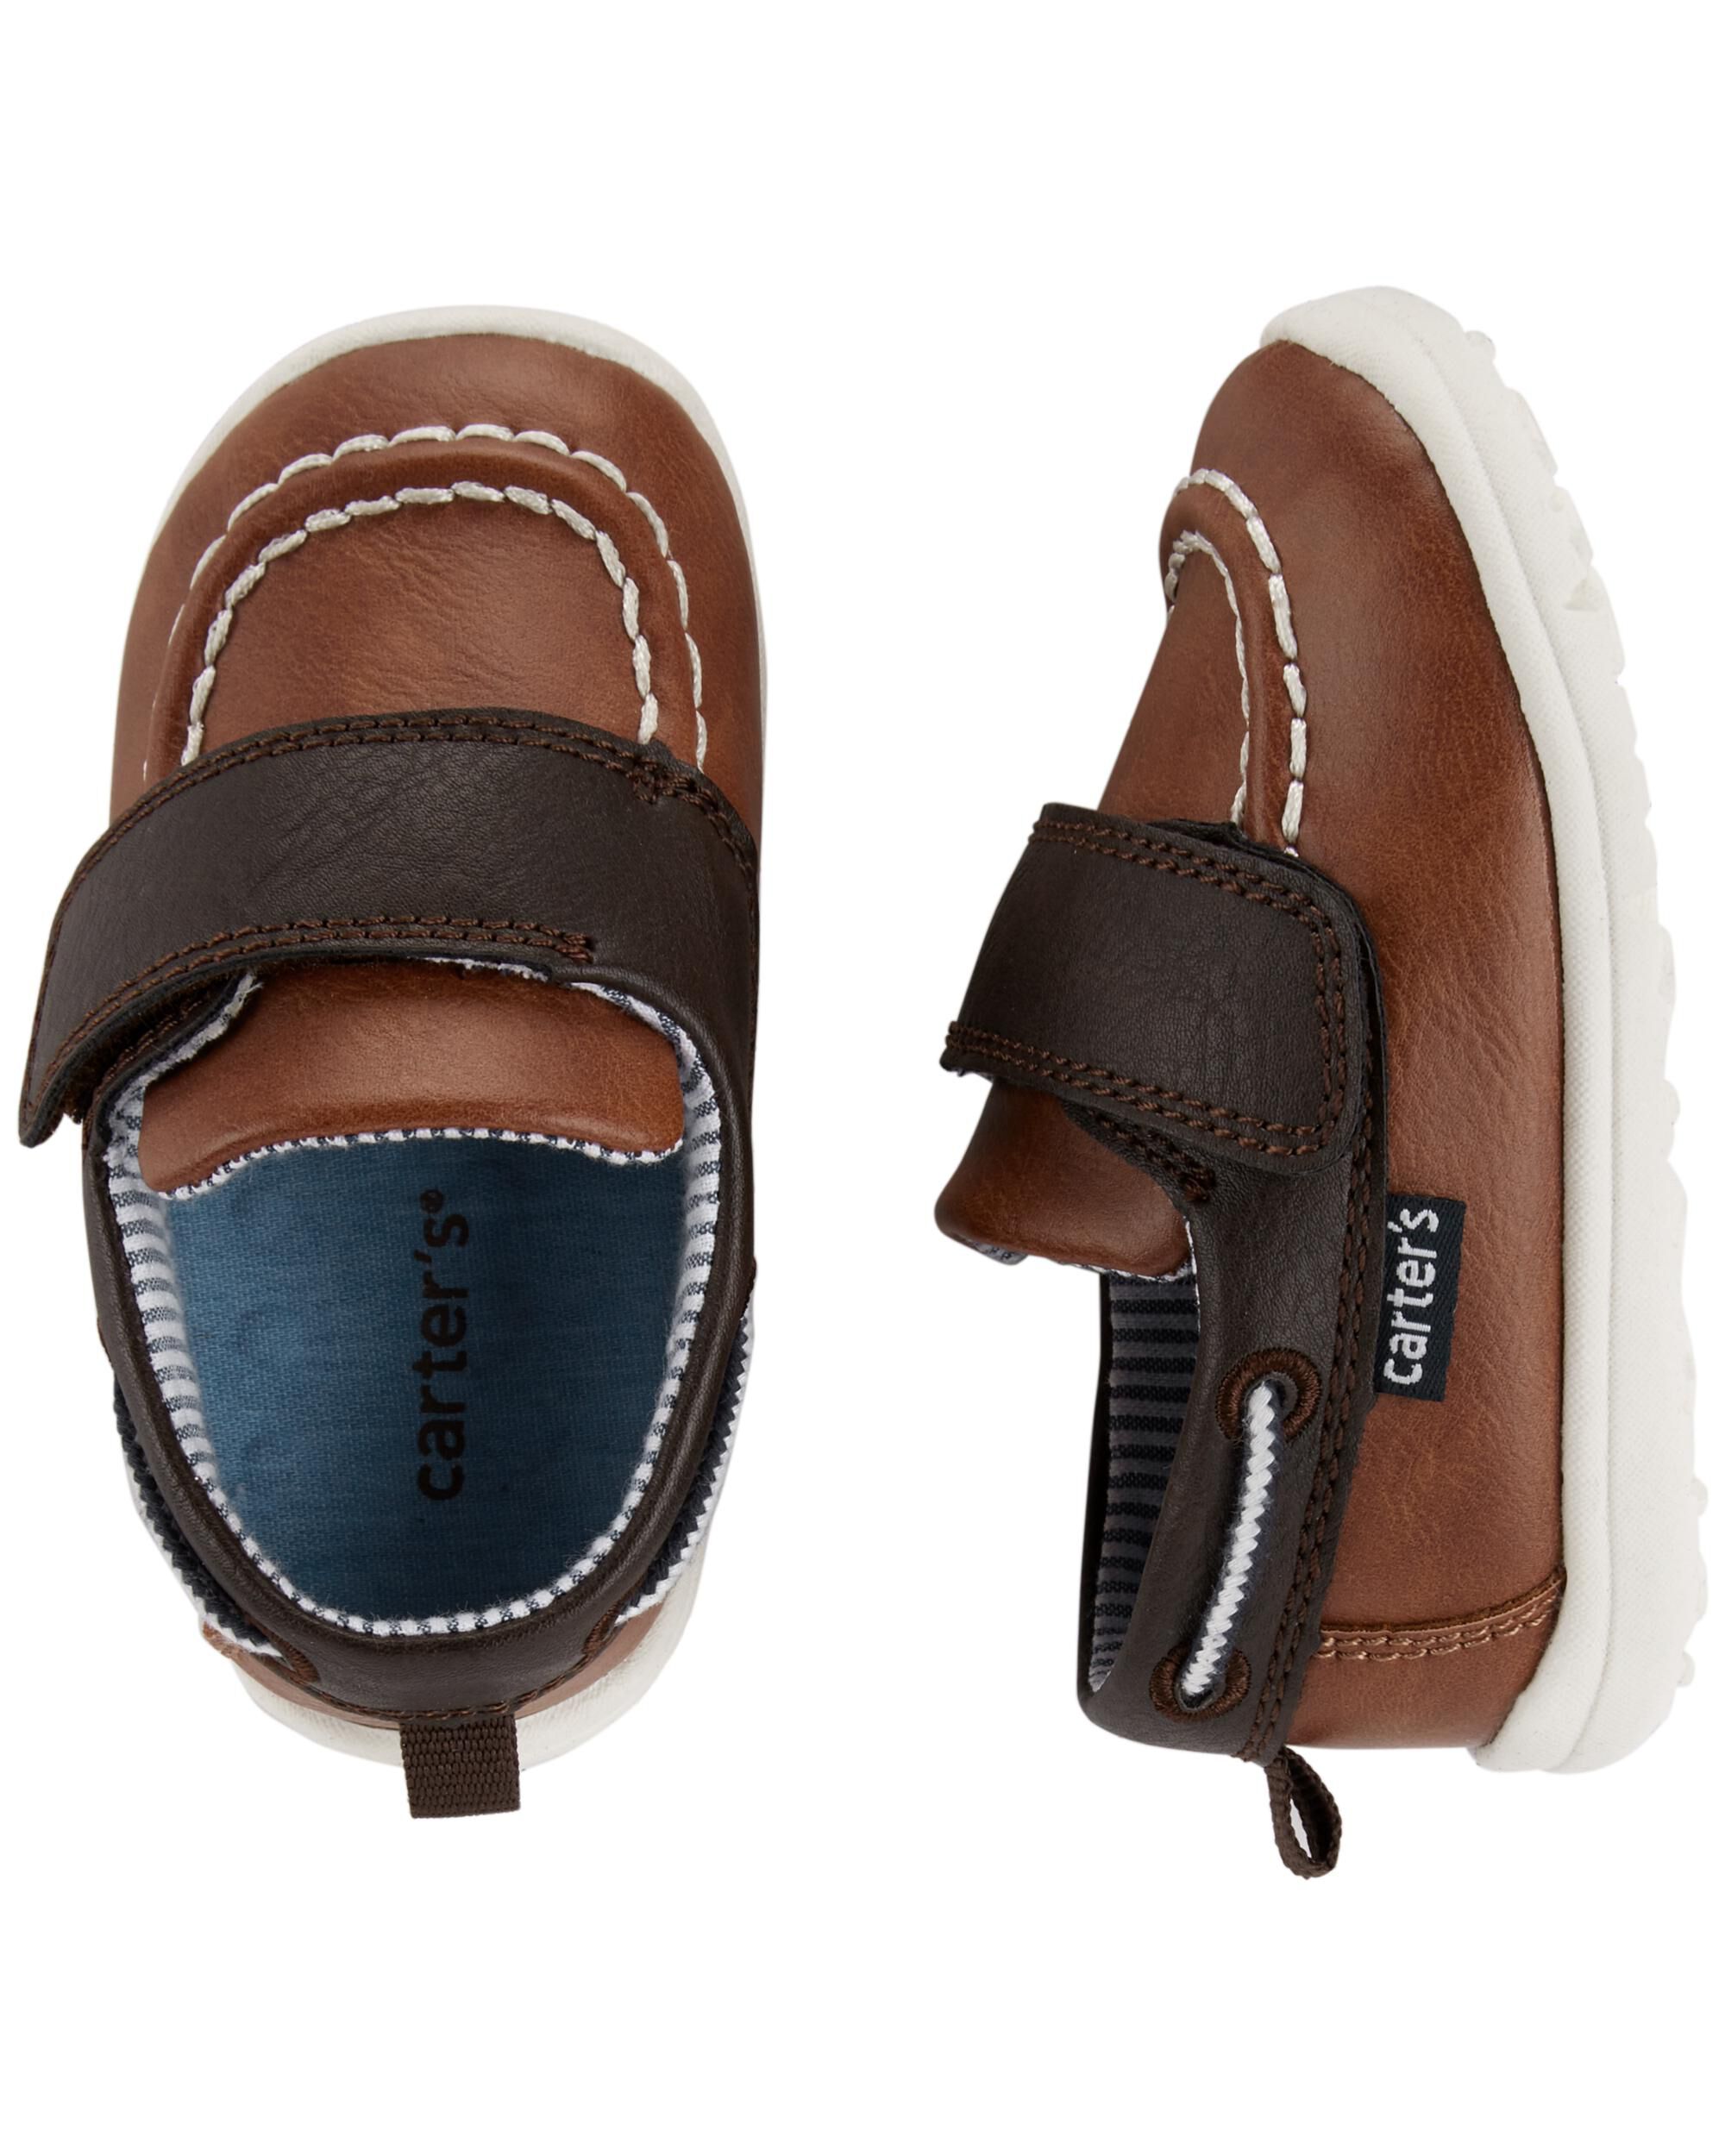 Carter's Every Step Boat Shoes 